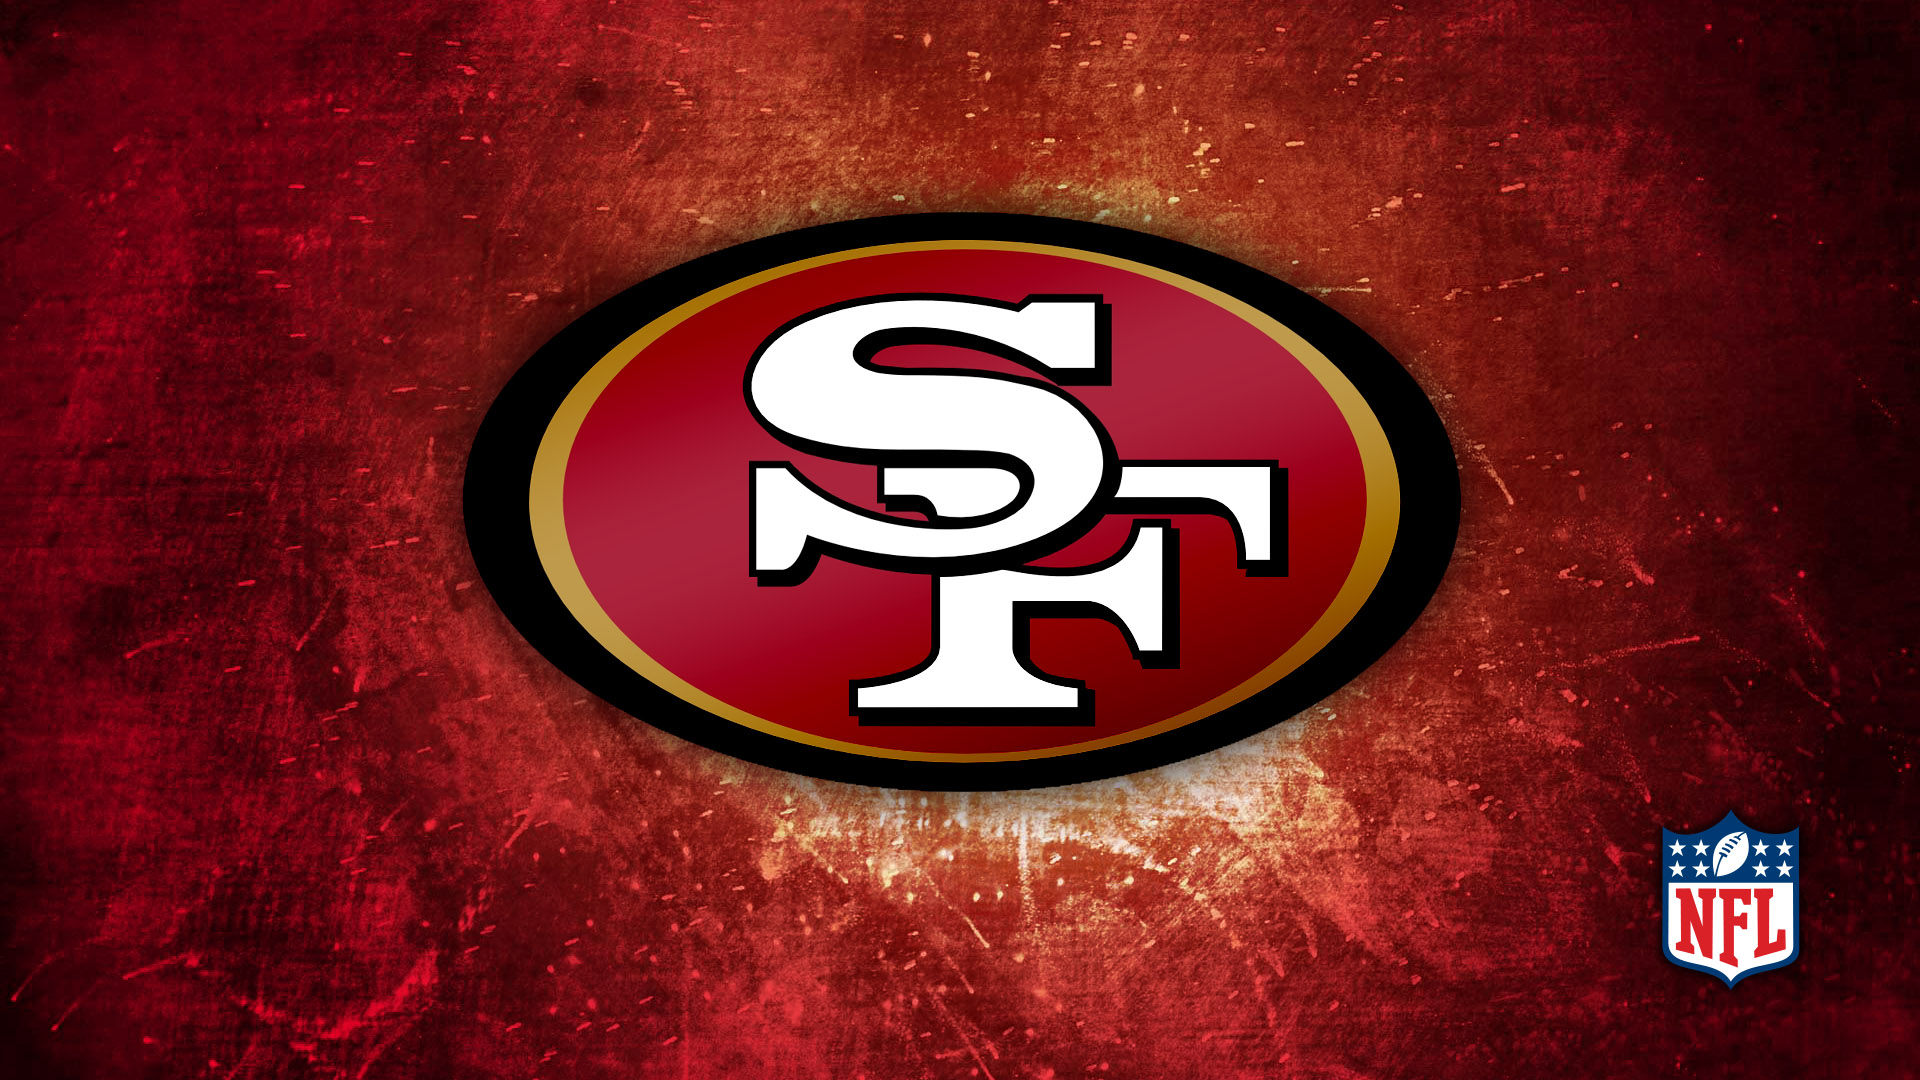 49ers Red Gold Logo 1920x1080 HD Image Sports NFL Football 1920x1080